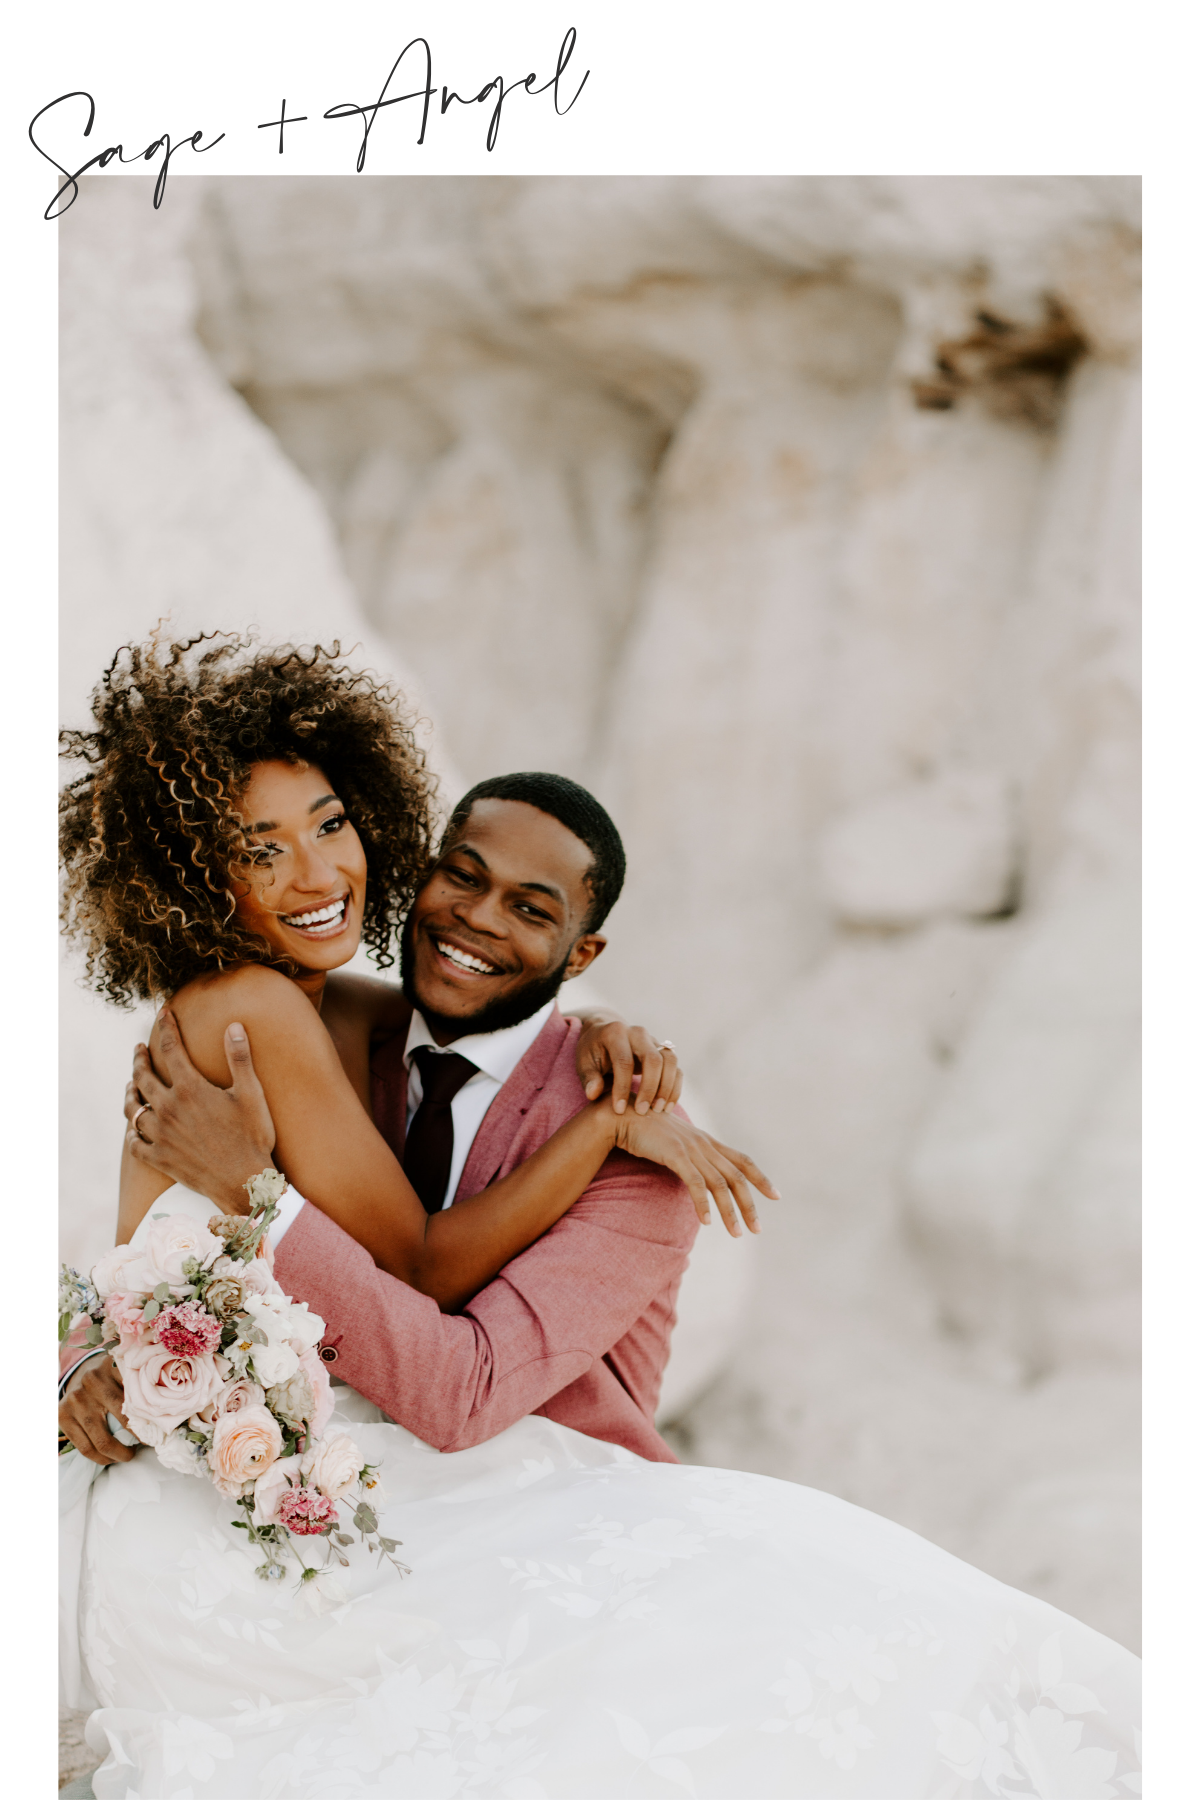 Stunning Black couple holding each other and laughing during their intimate elopement at the Paint Mines with luscious wedding bouquet in the groom’s hand by Denver florist MJM Designs. Groom is in a raspberry suit and bride is wearing a Lea-ann Bel…